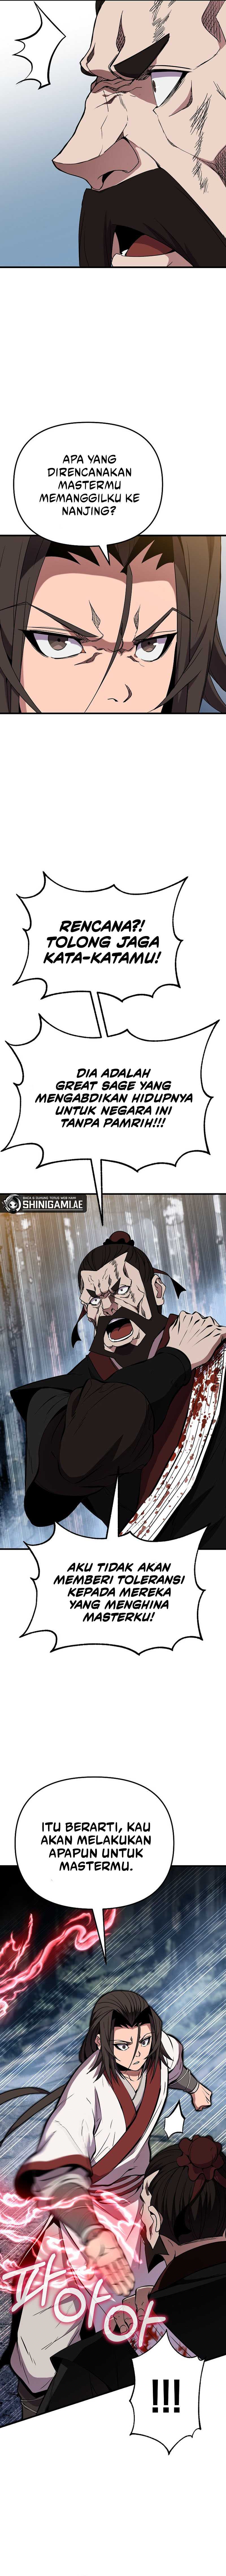 The Invincible of the East Chapter 18